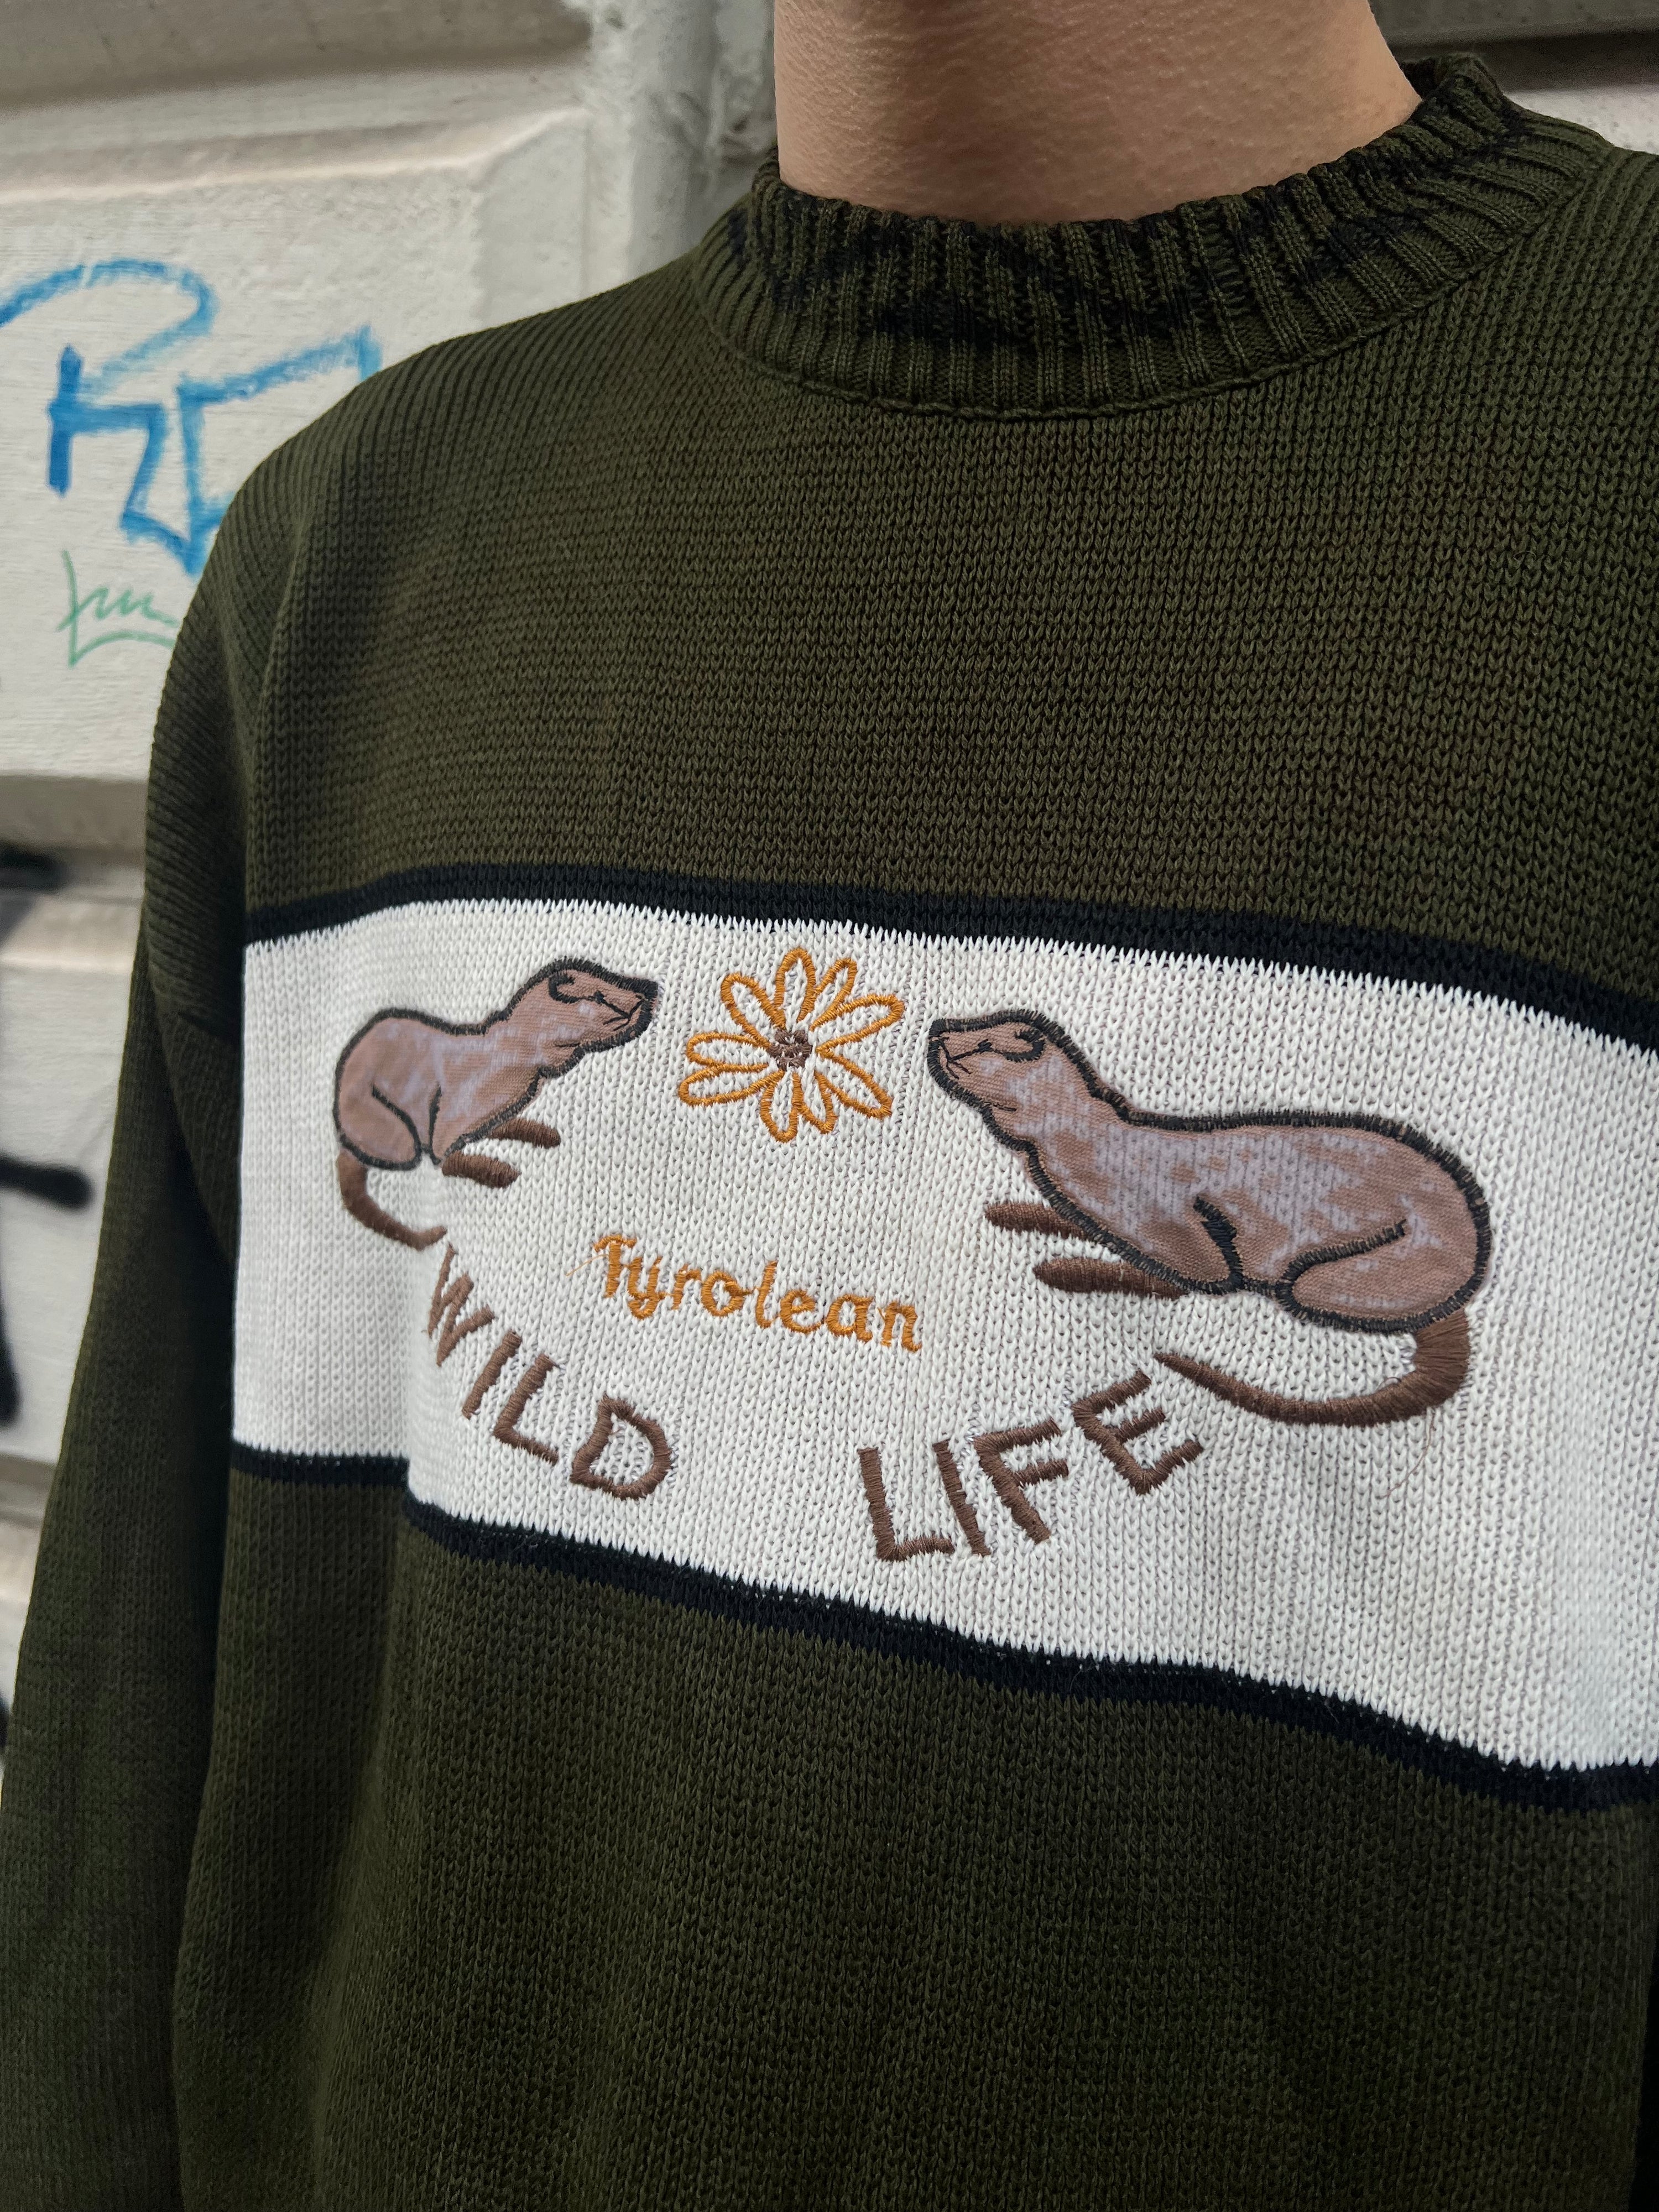 Vintage 80s Wild Life Tyrolean Knit Sweater (S)